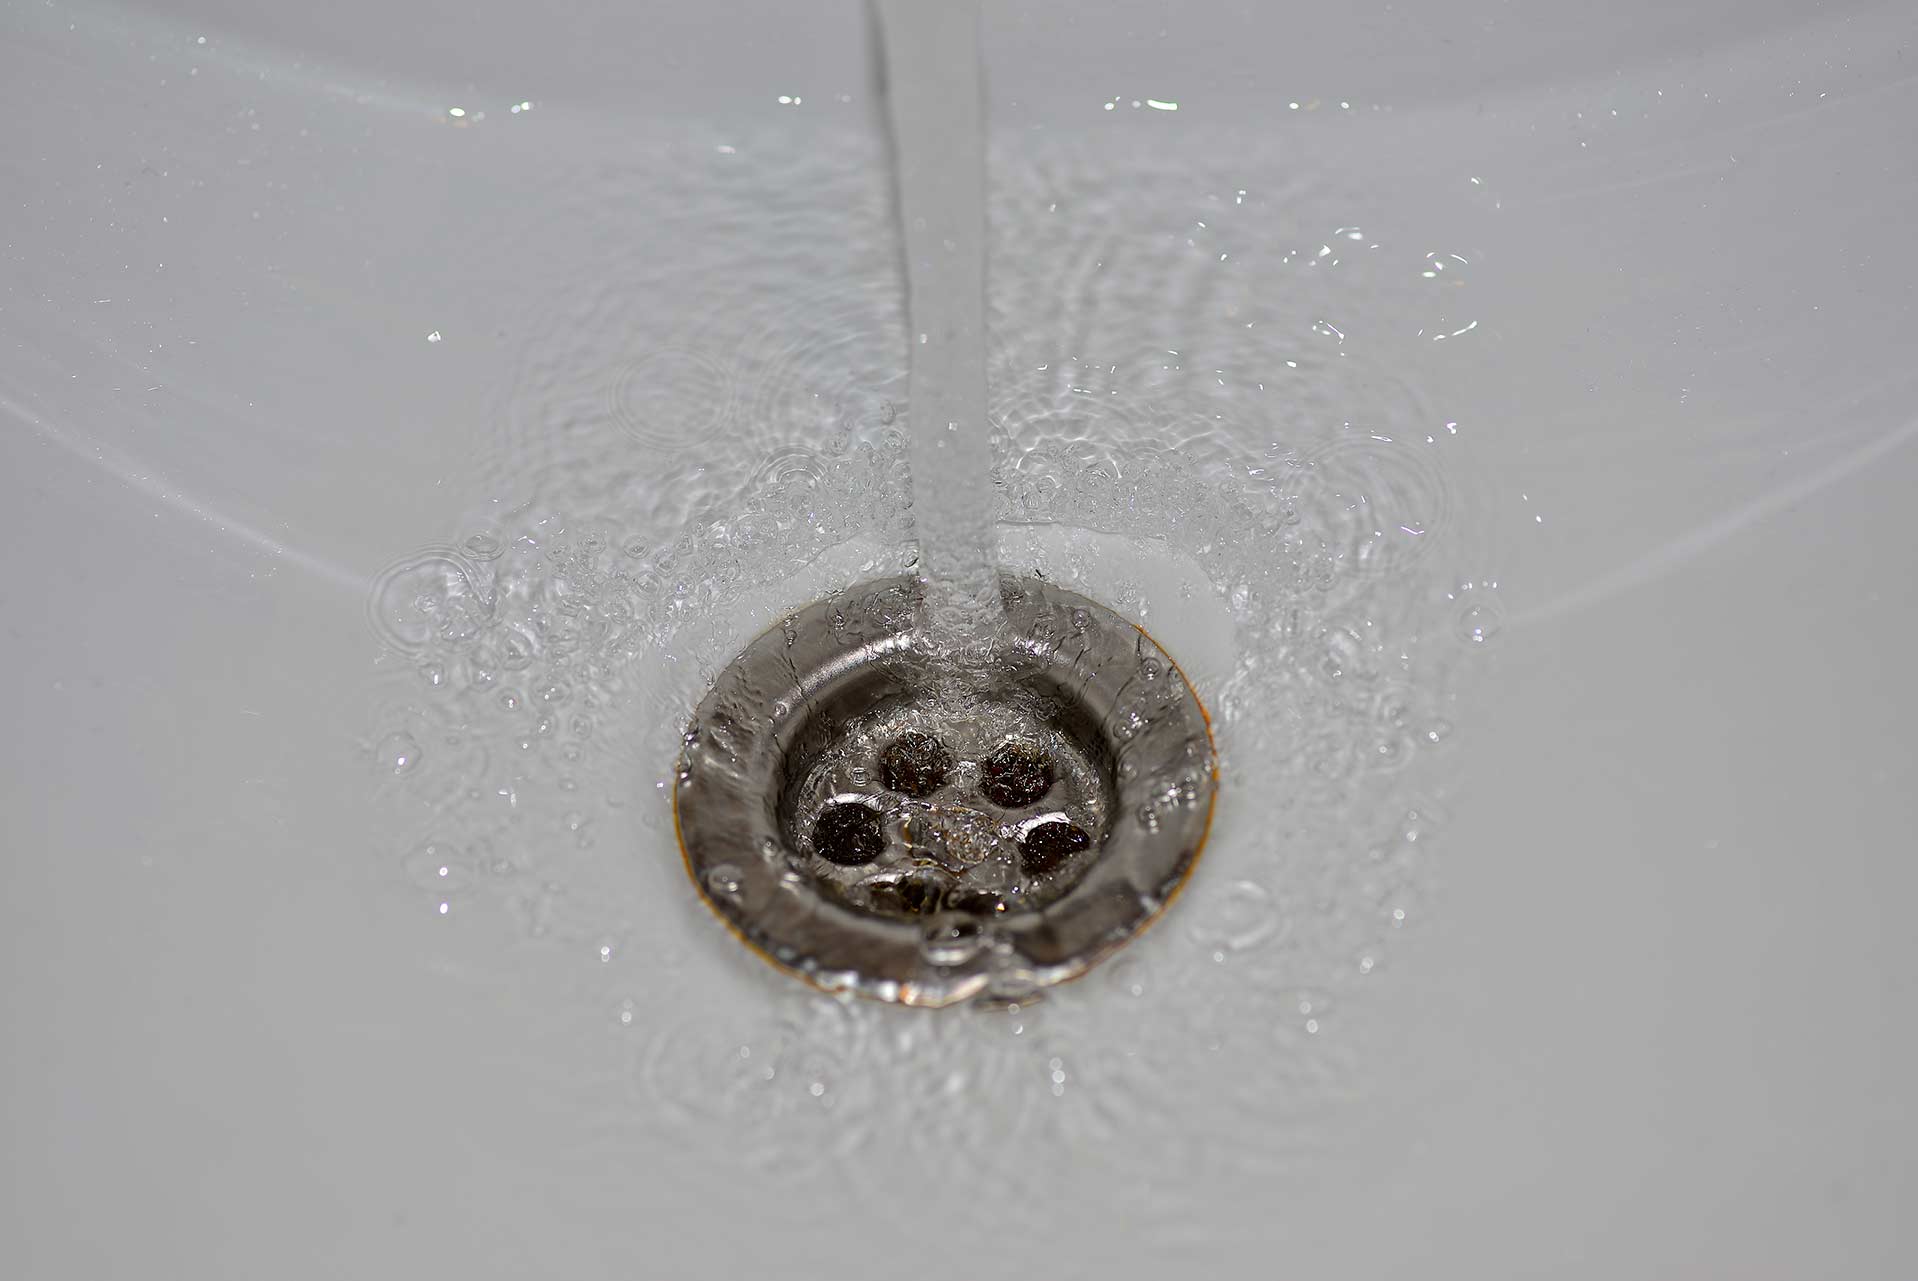 A2B Drains provides services to unblock blocked sinks and drains for properties in Slough.